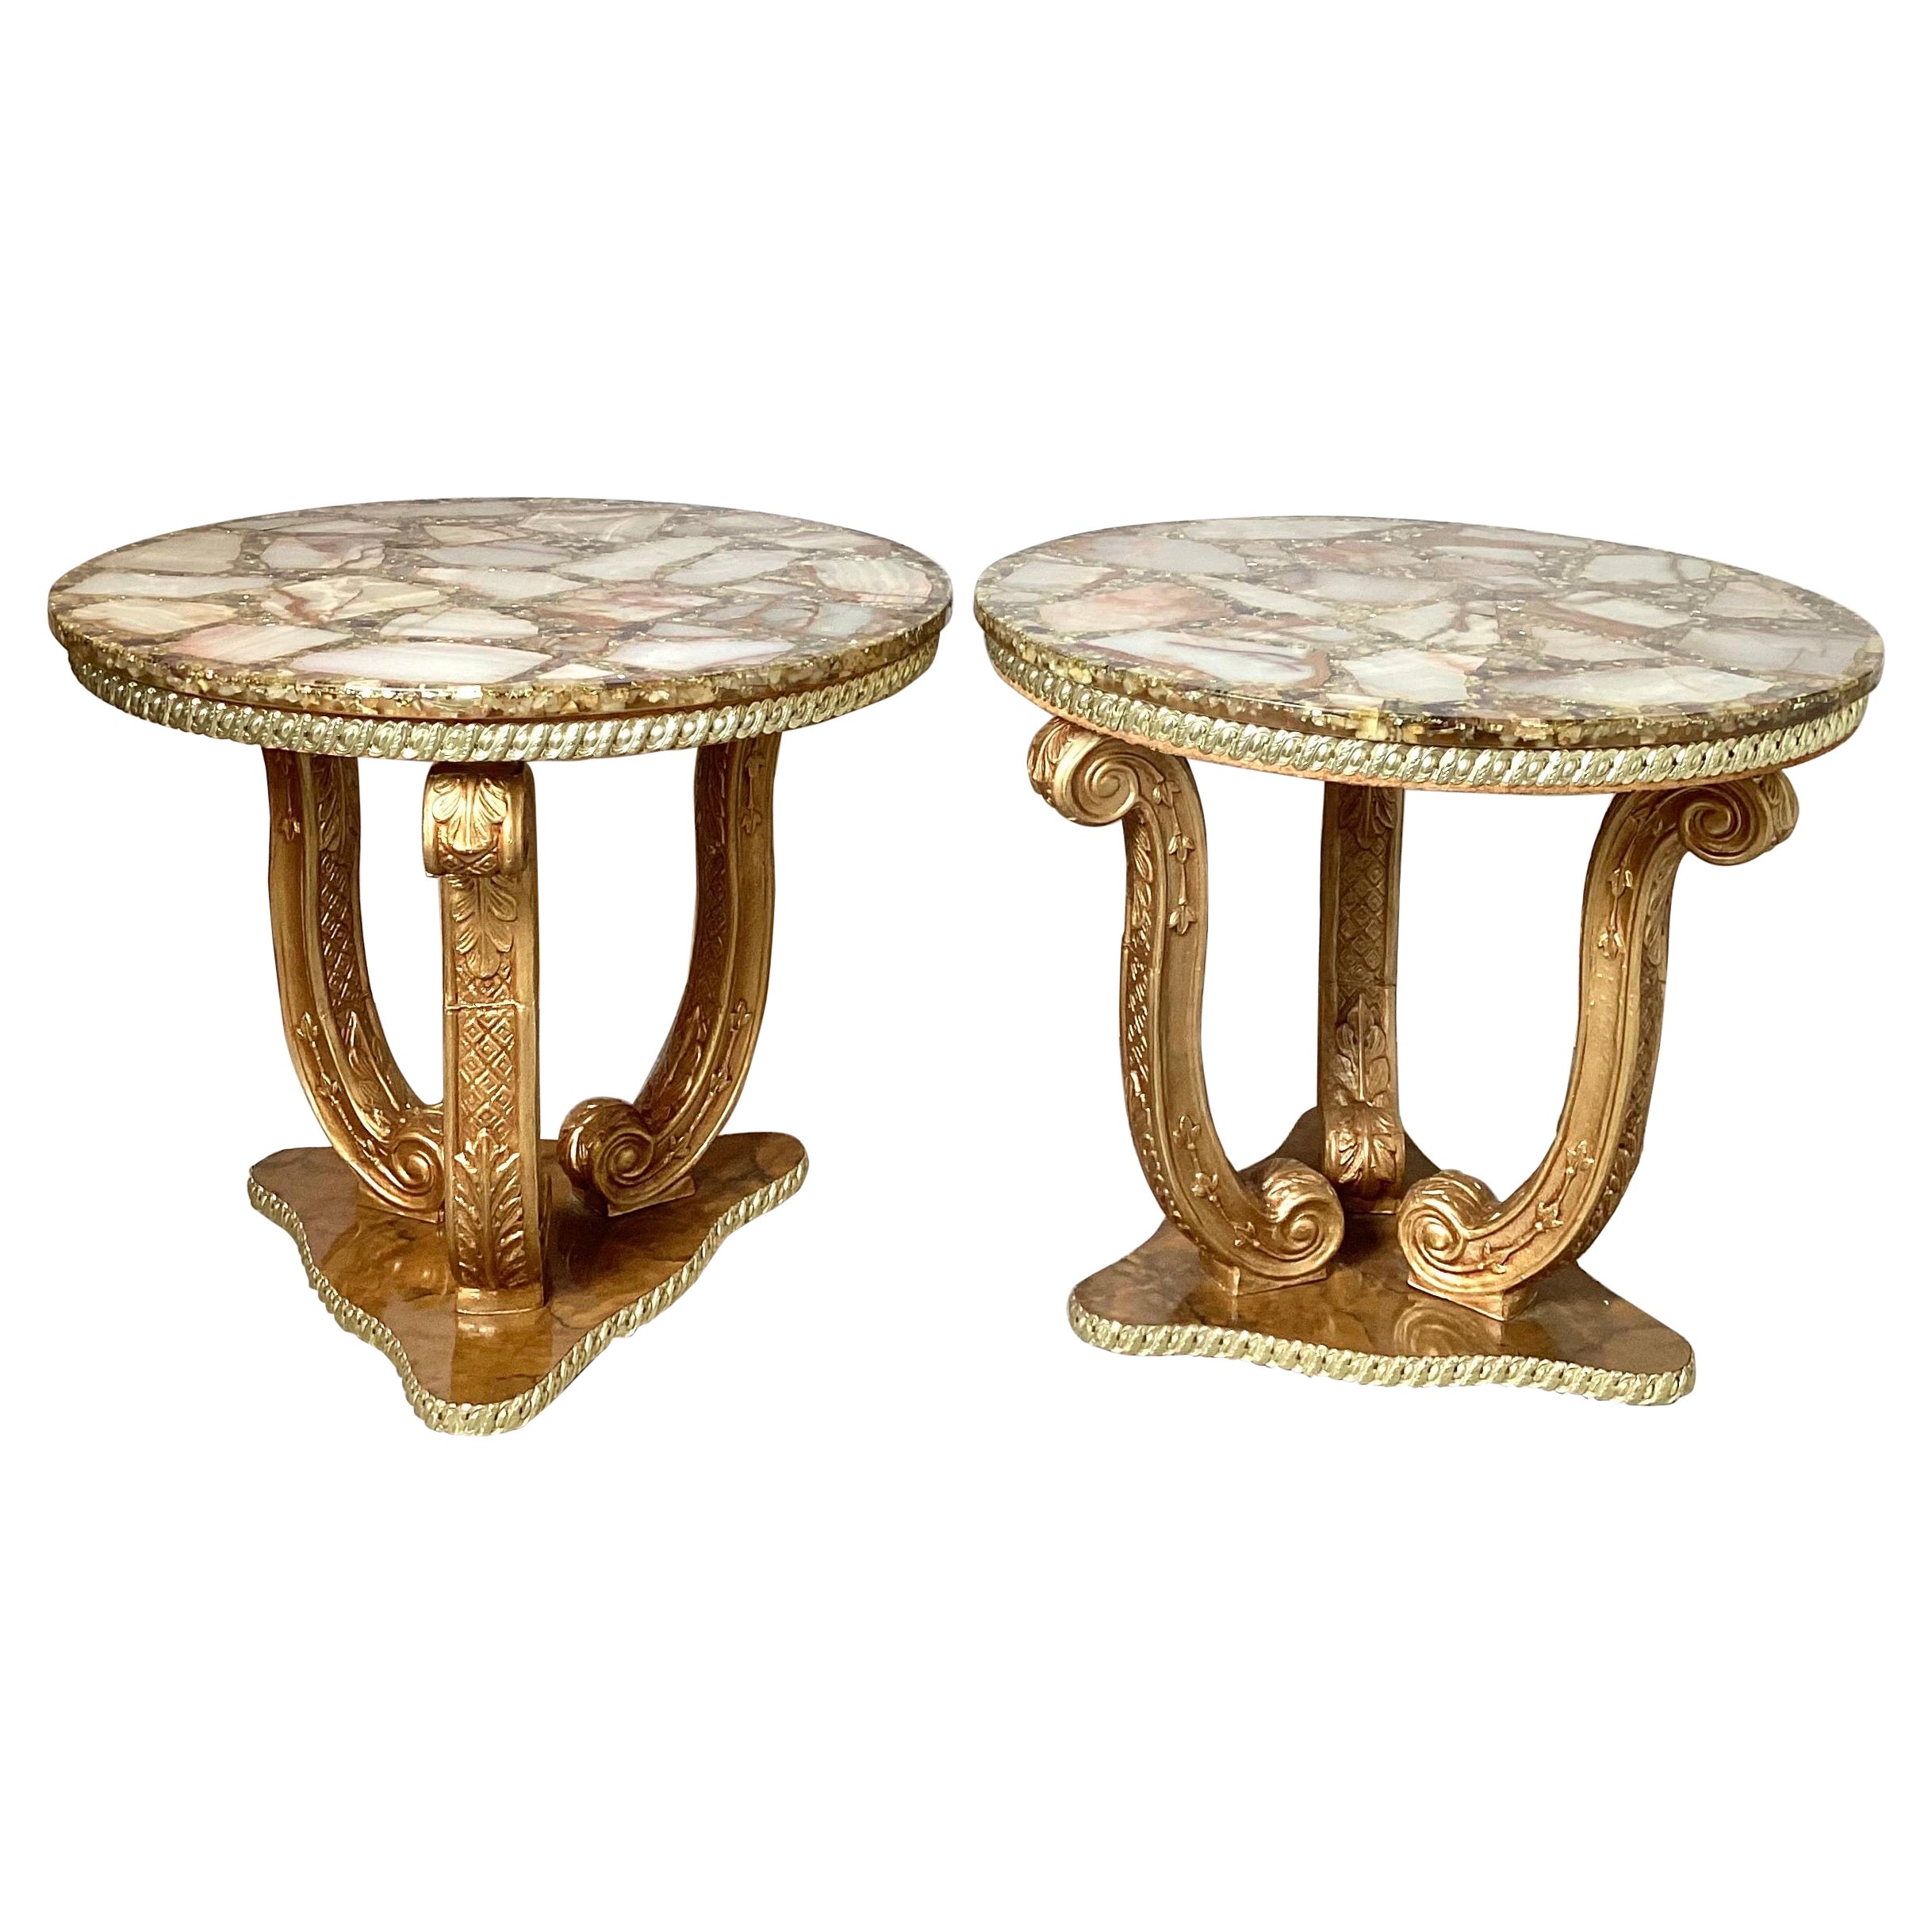 Pair of Abalone Shell and Gilt Side Tables